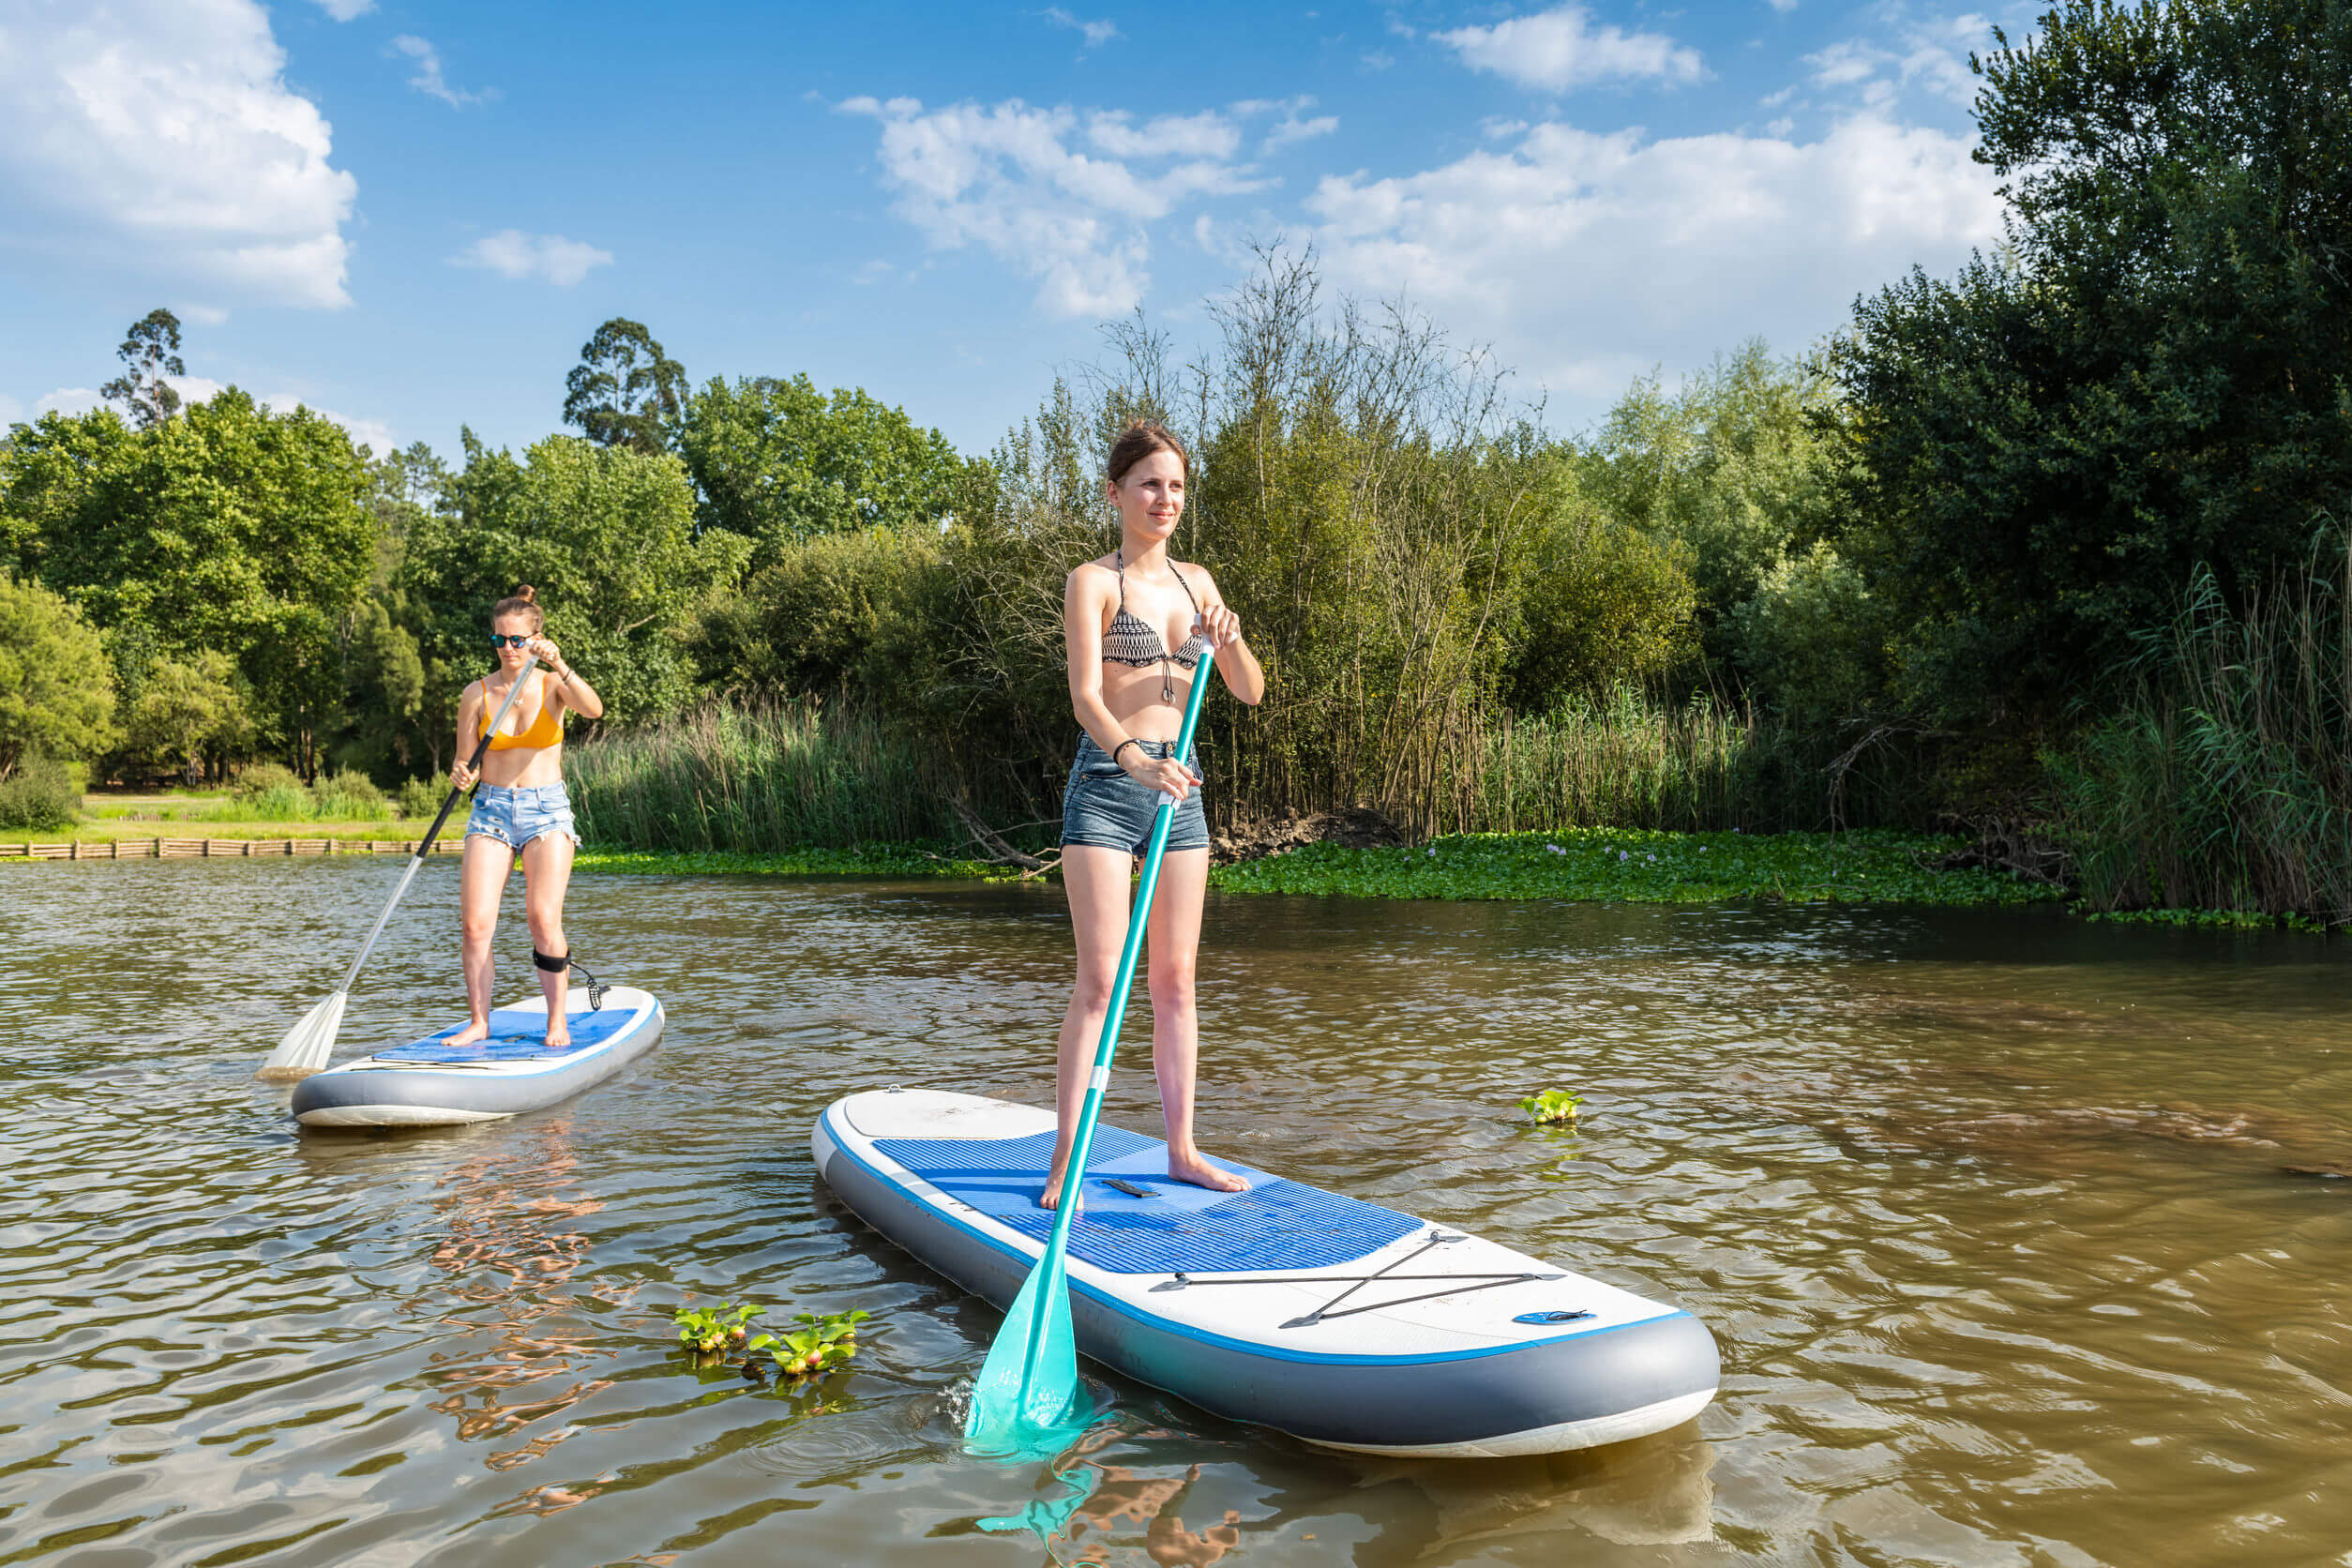 13 BEST Spots for Paddle Boarding in Hampshire